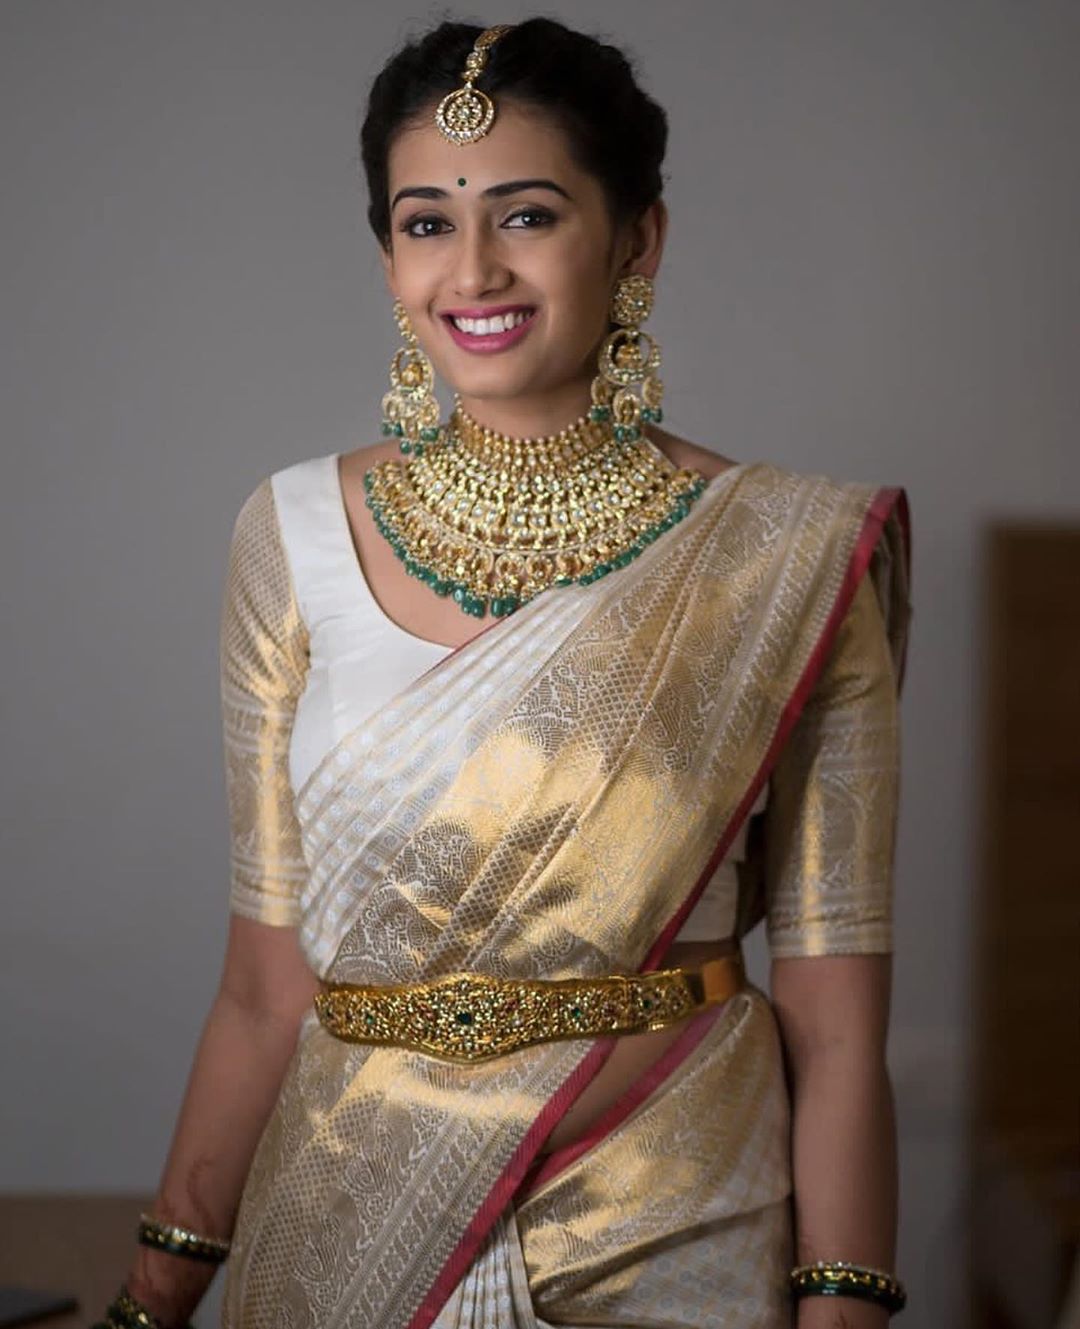 Unique South Indian Bridal Jewellery Ideas For This Wedding Season